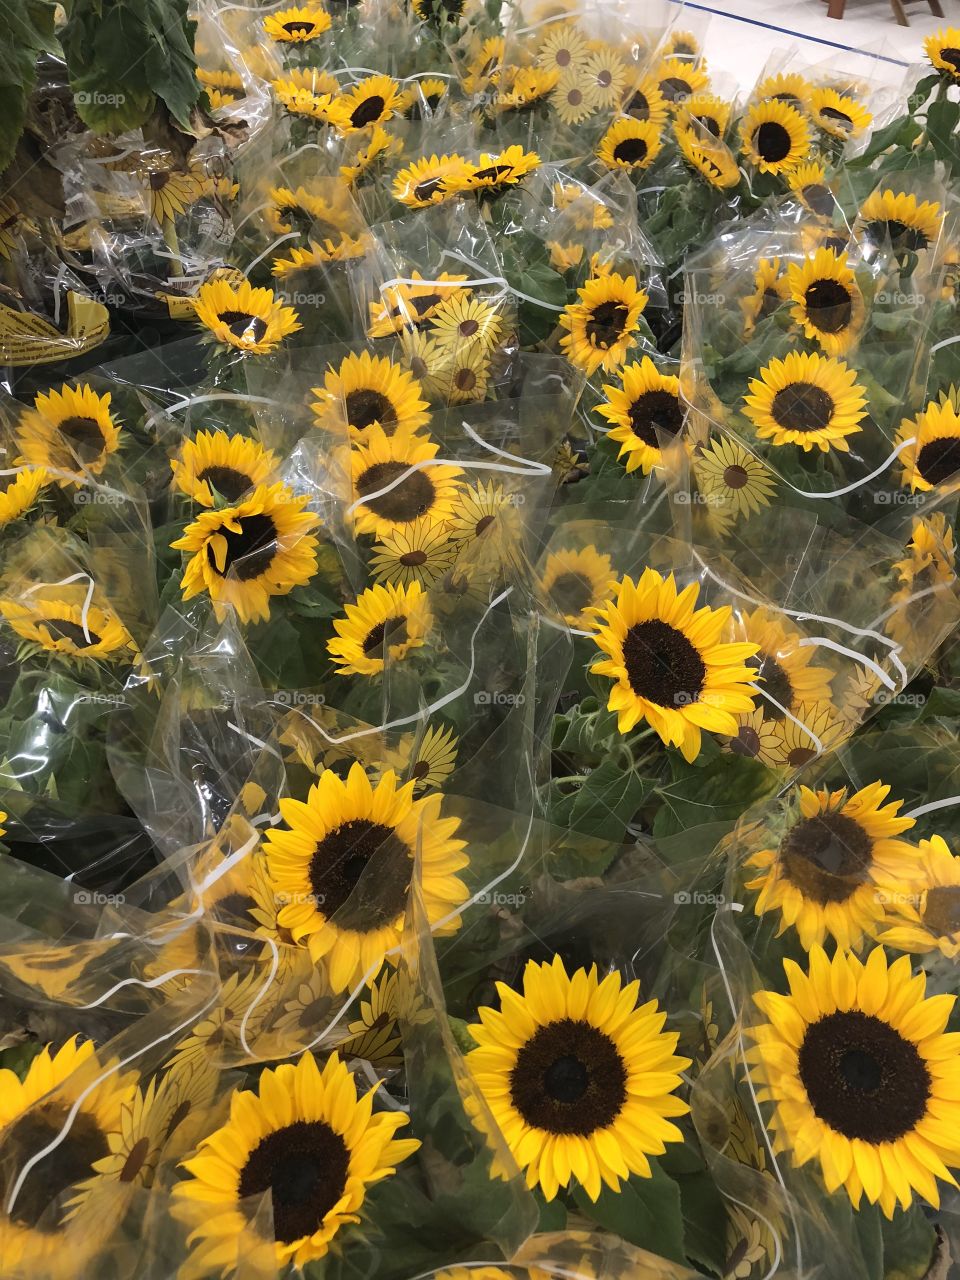 Many sunflowers on display in the supermarket